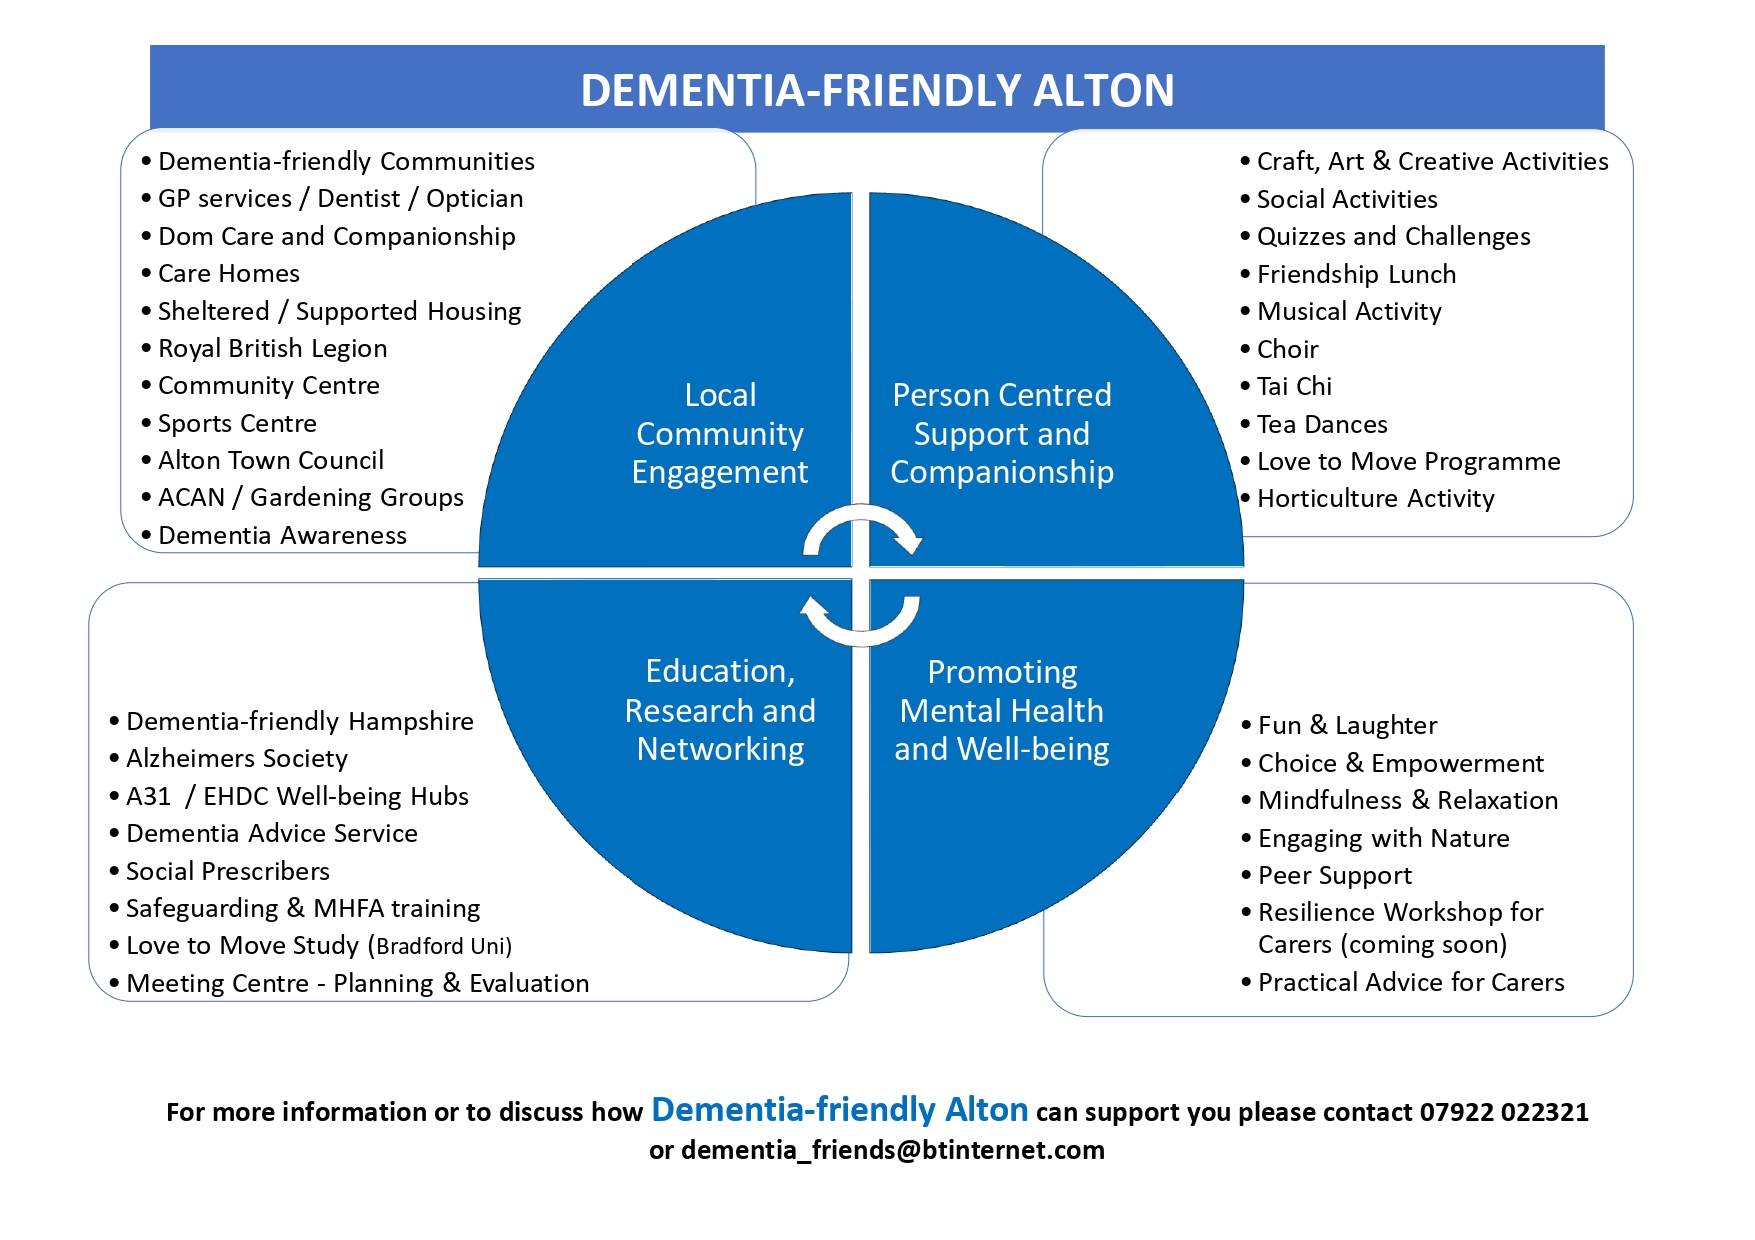 Dementia-friendly Alton Organisation, Committee and Policies